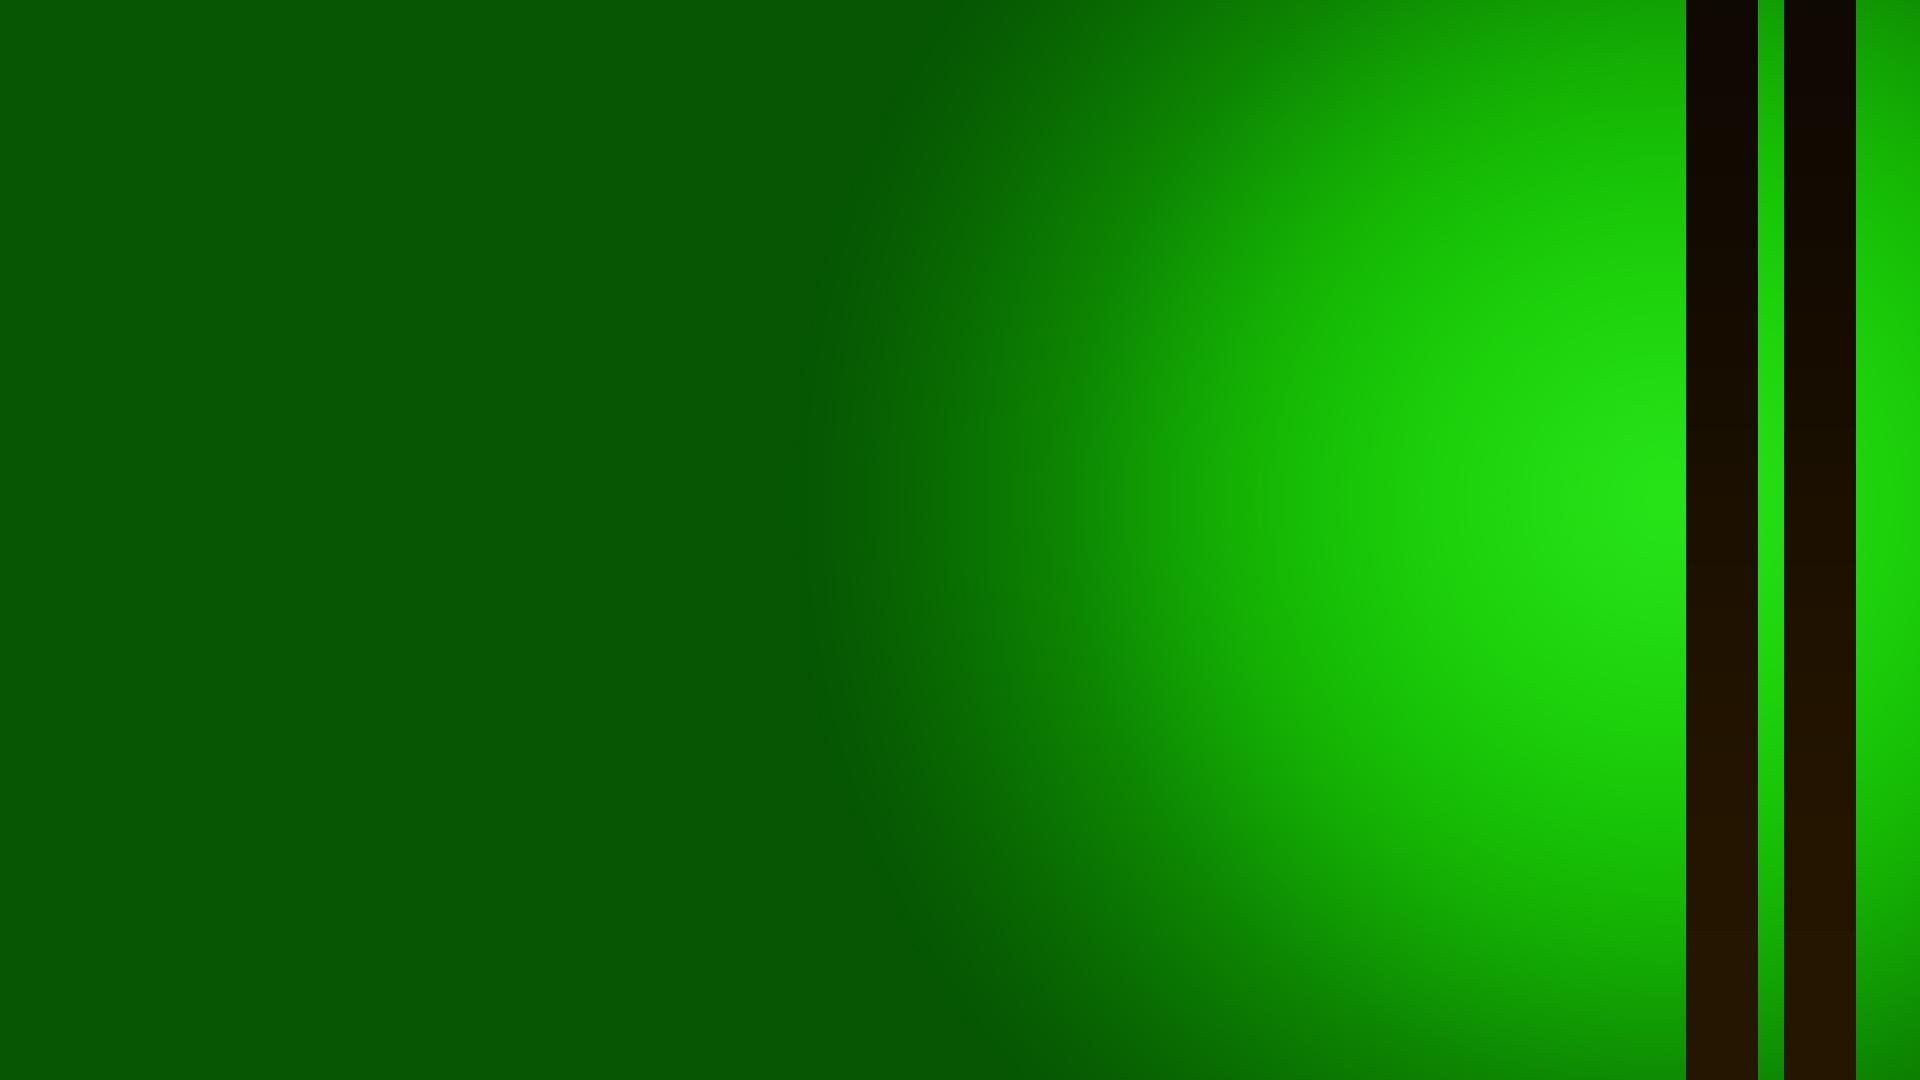 Digital Green, solid, plain, black, stripes, simple, 3d and abstract